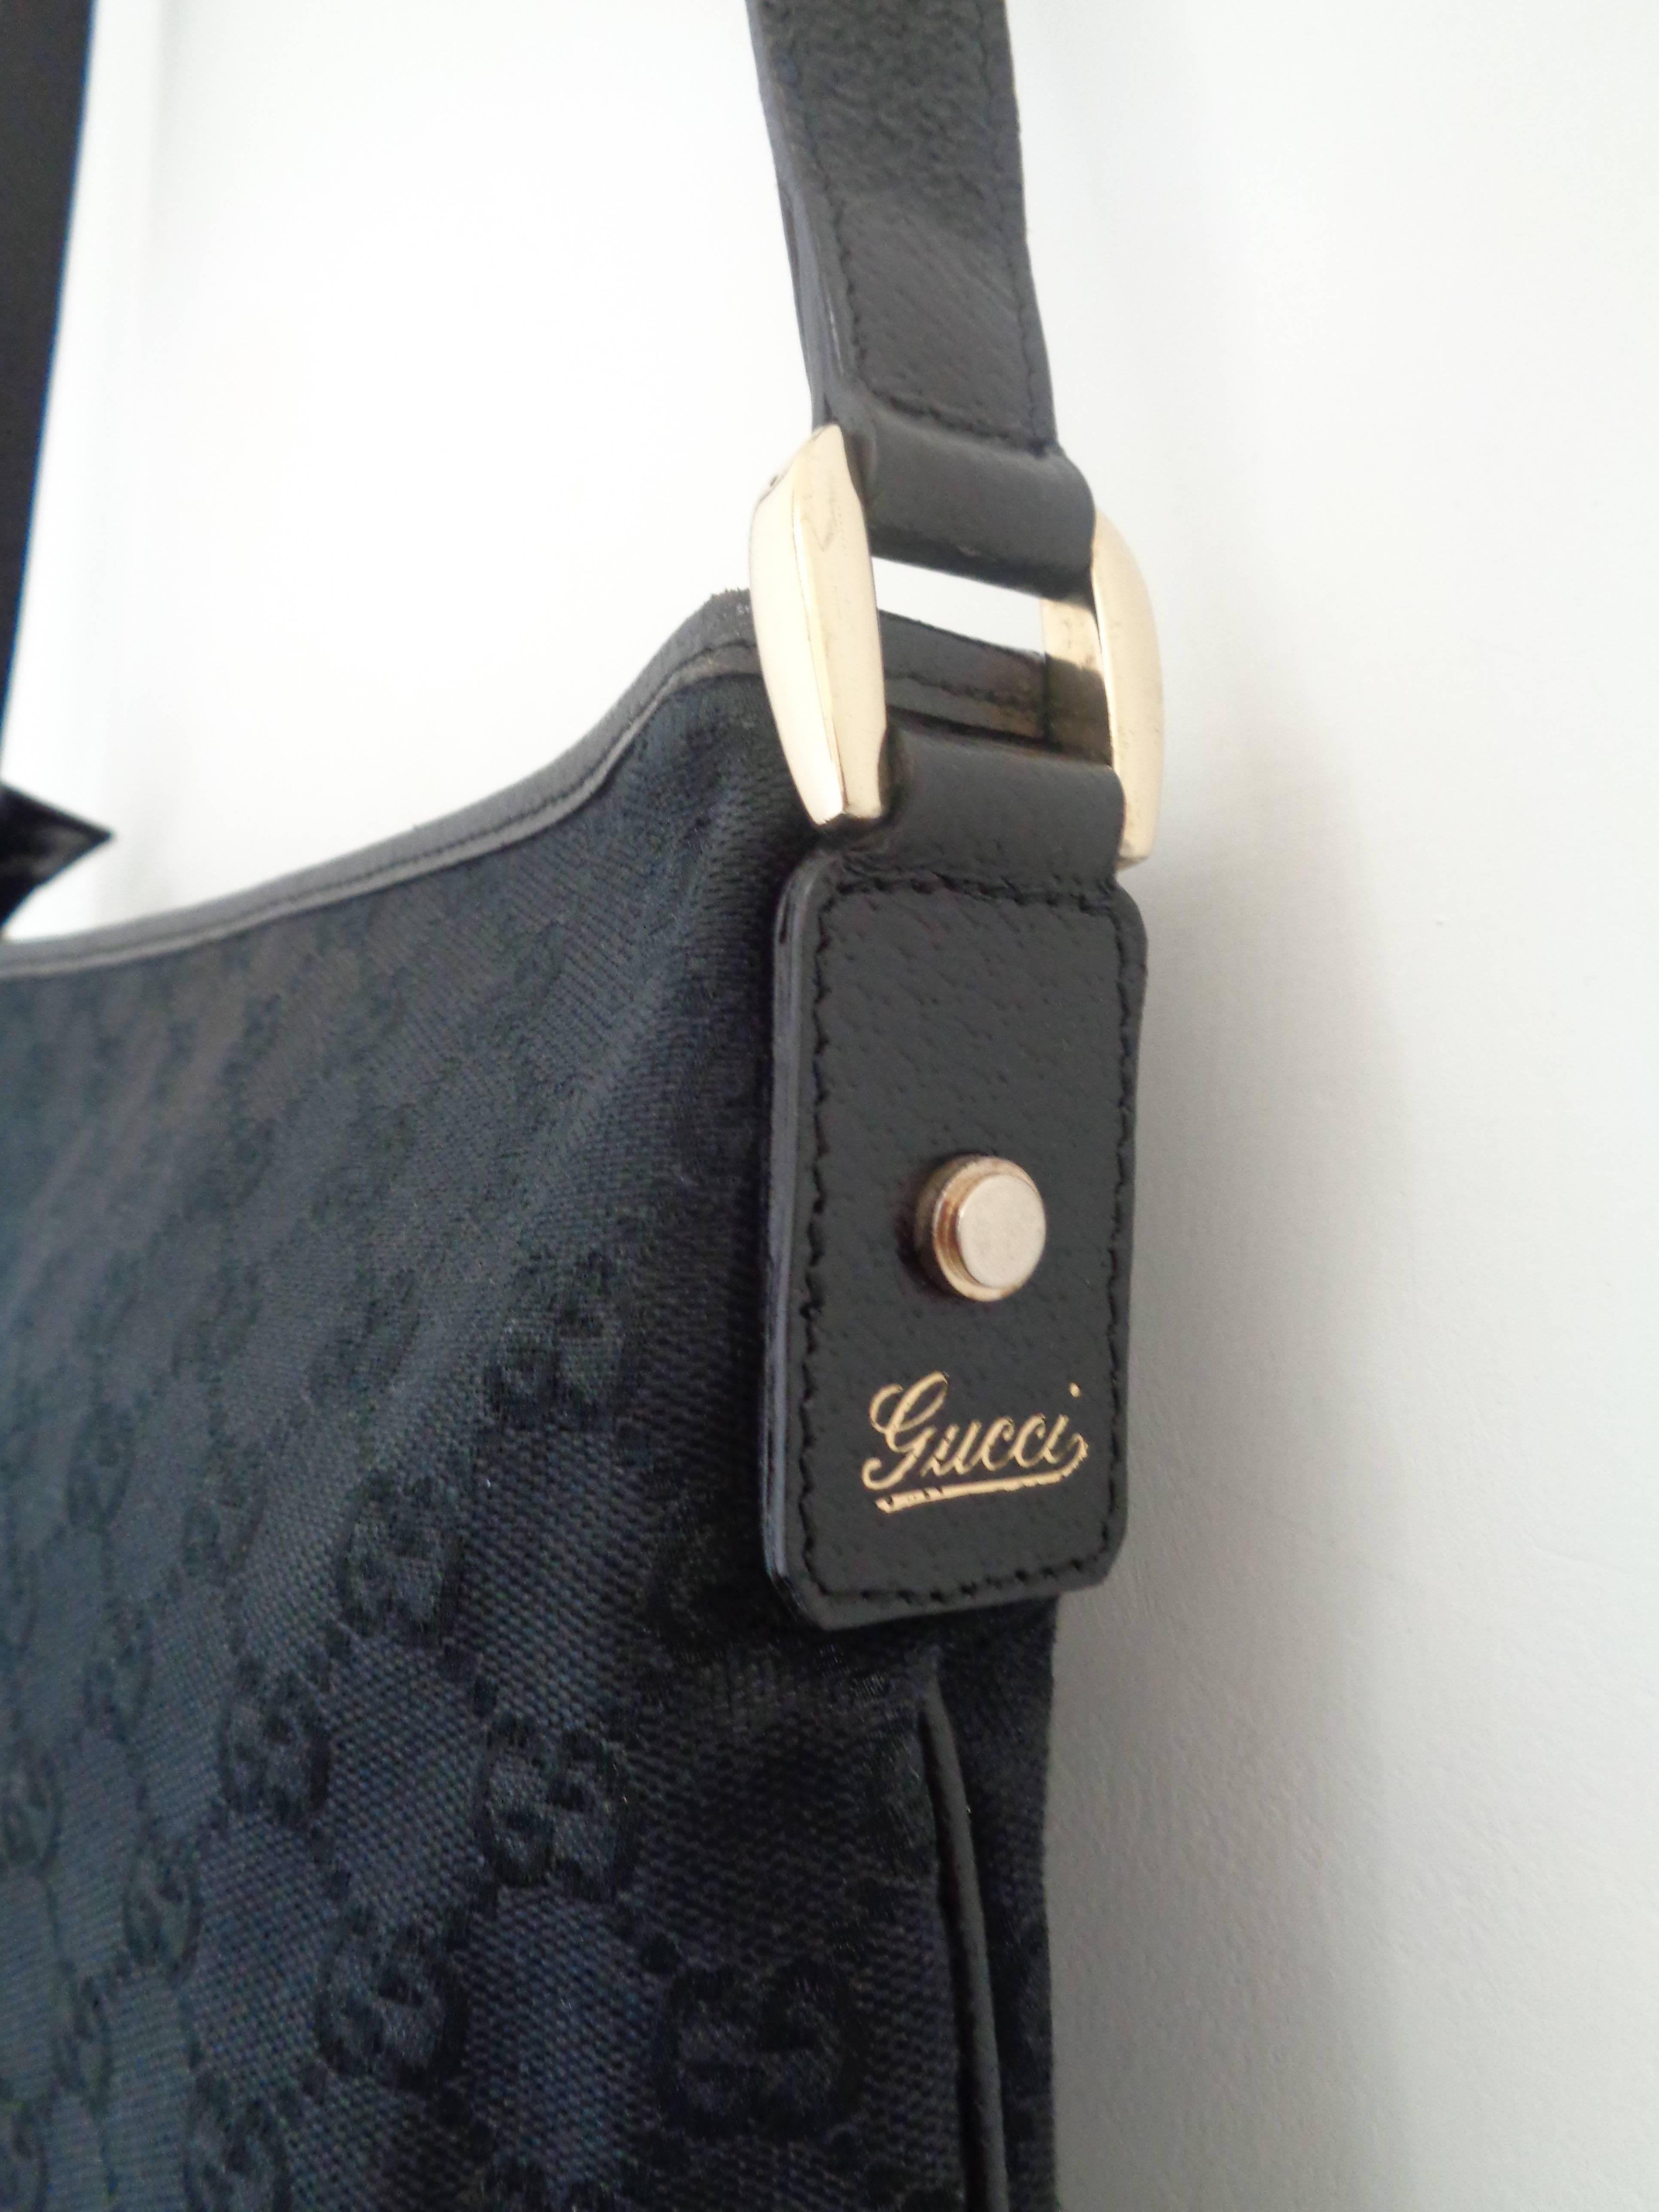 Gucci Black Canvas Shoulder Bag

Totally made in italy

Gold Tone Hardware

